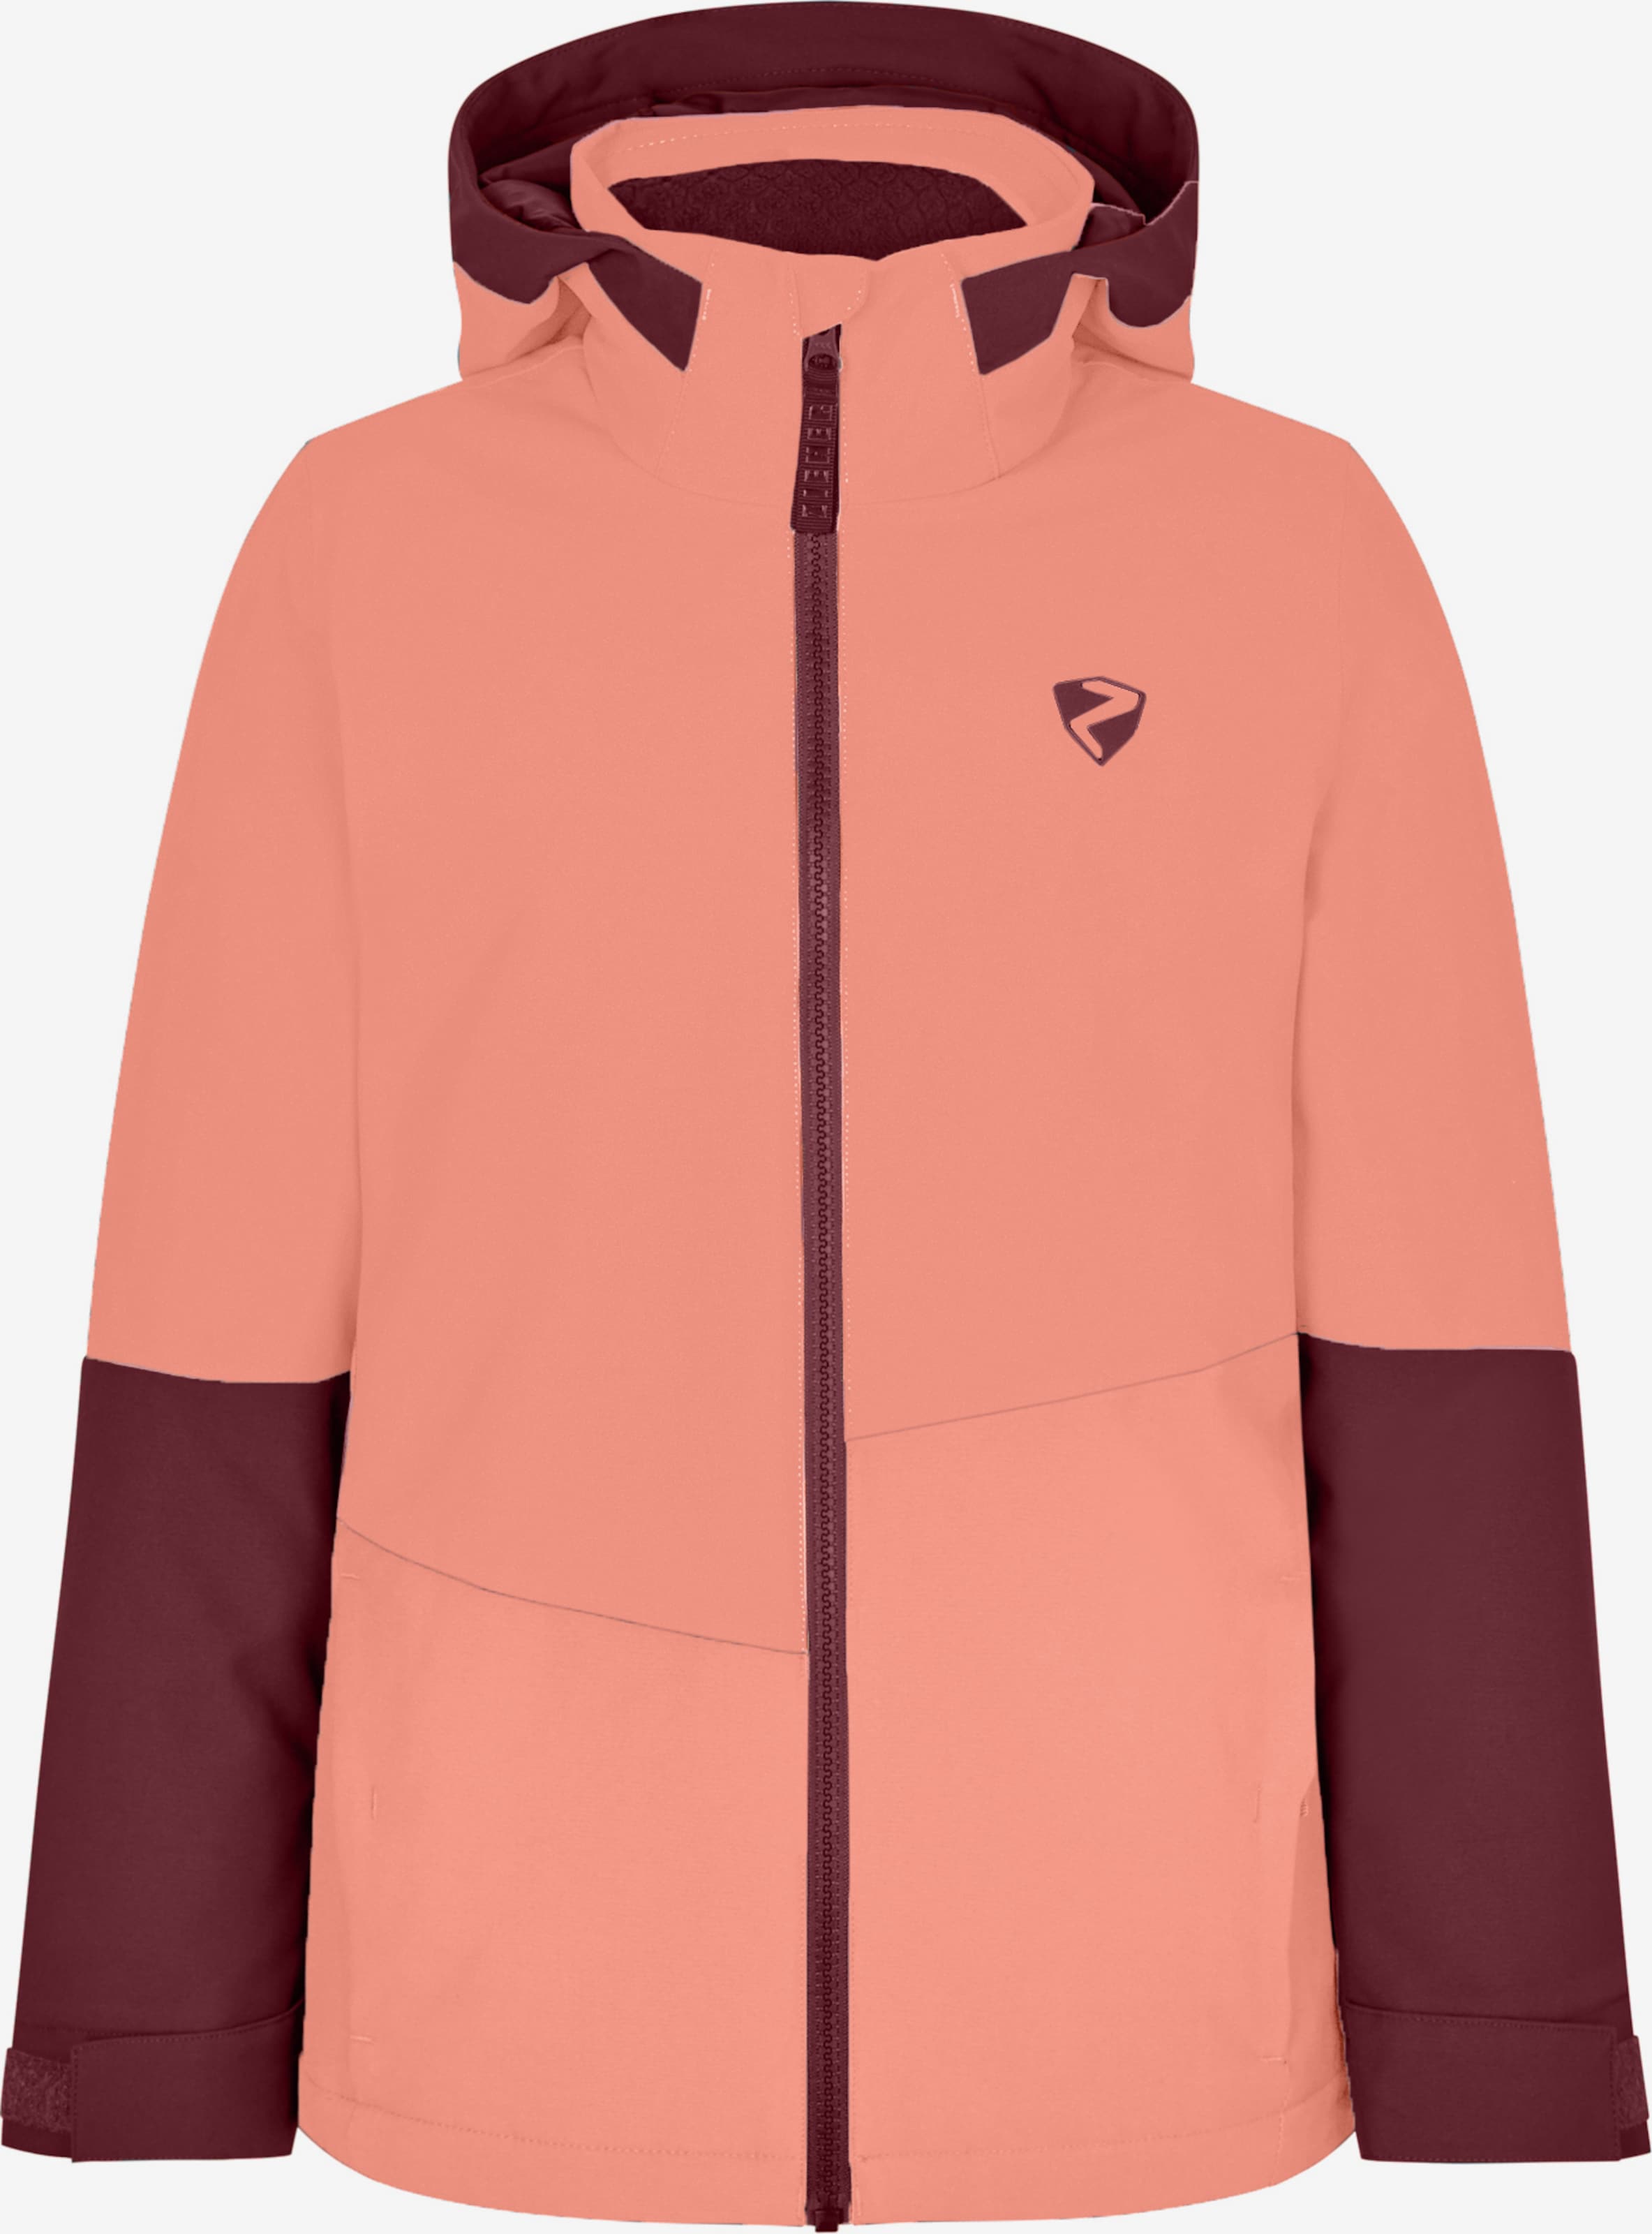 ZIENER Athletic Jacket 'AVAK' in Apricot | ABOUT YOU